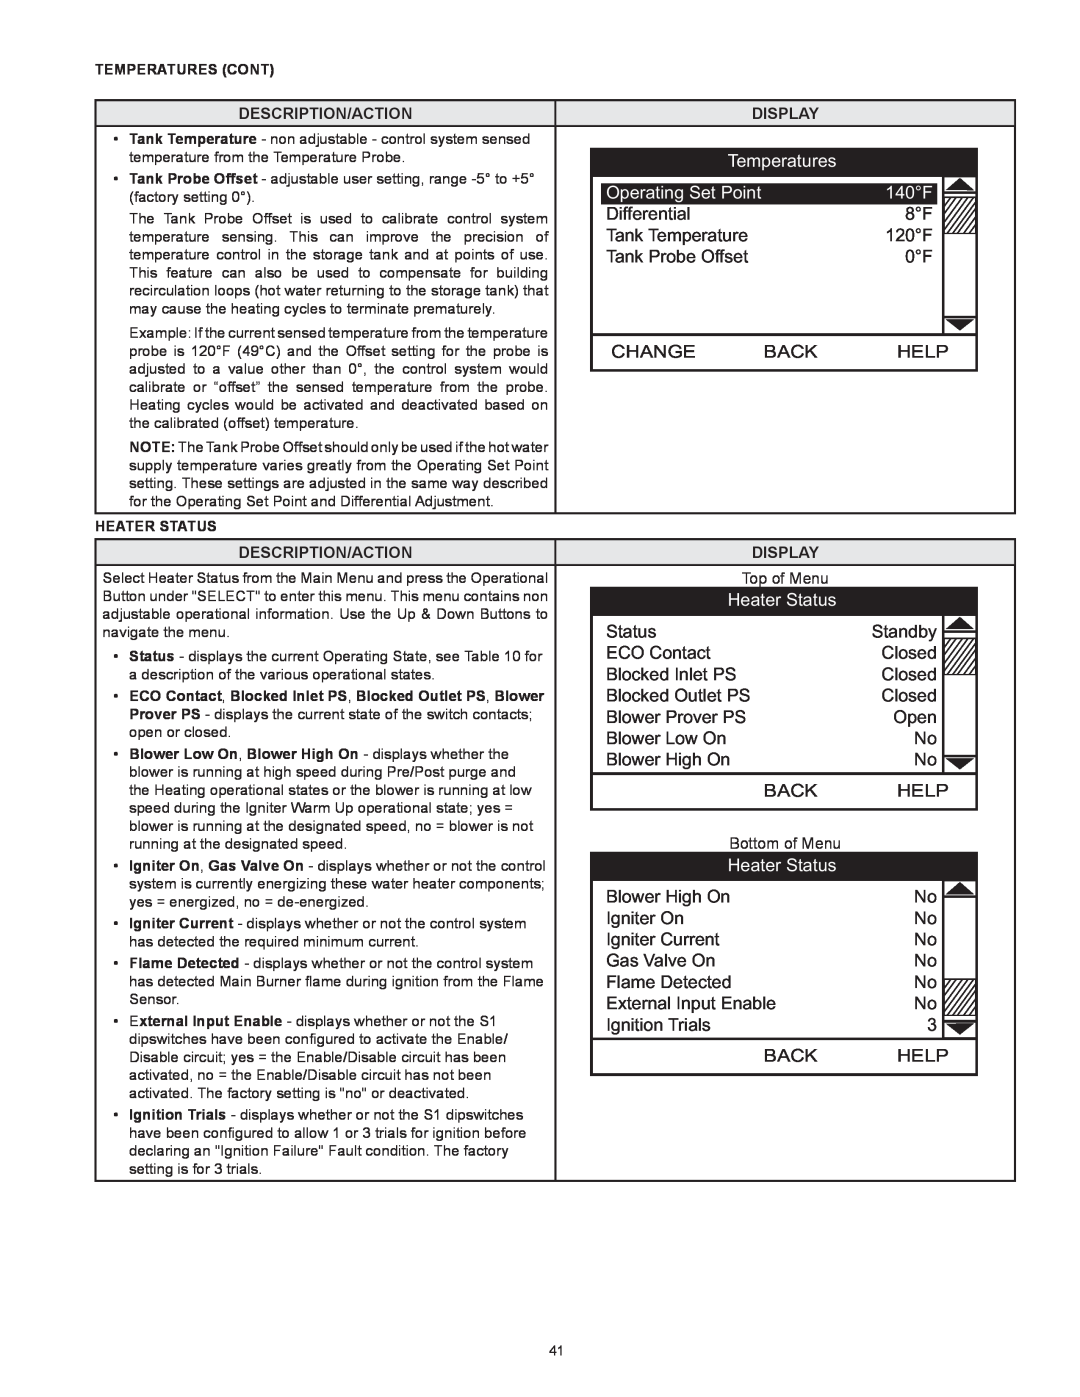 American Water Heater VG6250T100 instruction manual 140F, Heater Status, Temperatures, Operating Set Point 